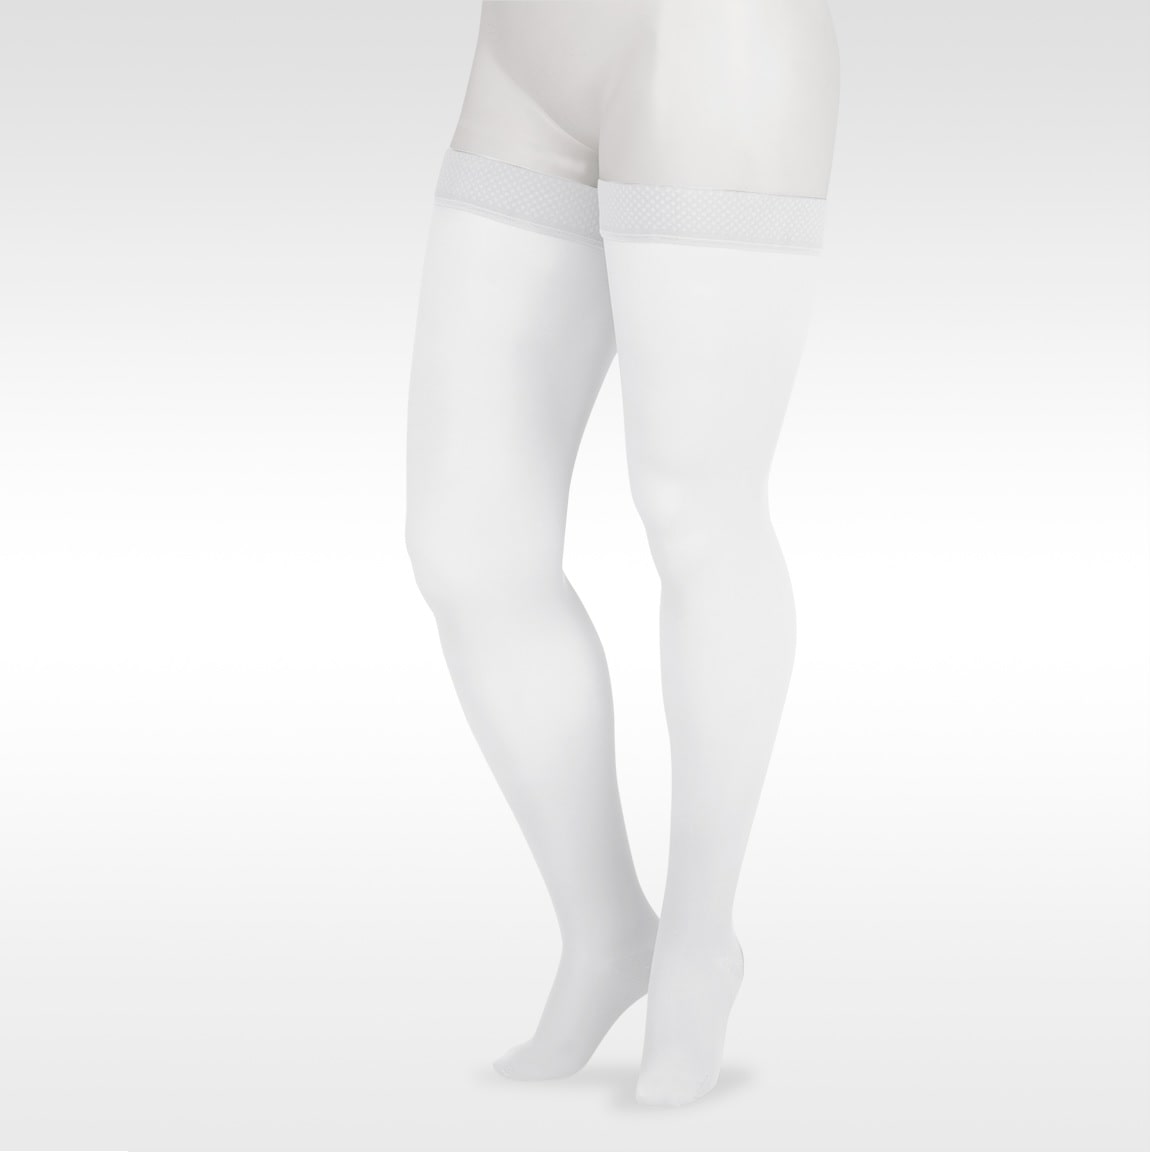 ExoSoft Thigh High Compression Stockings